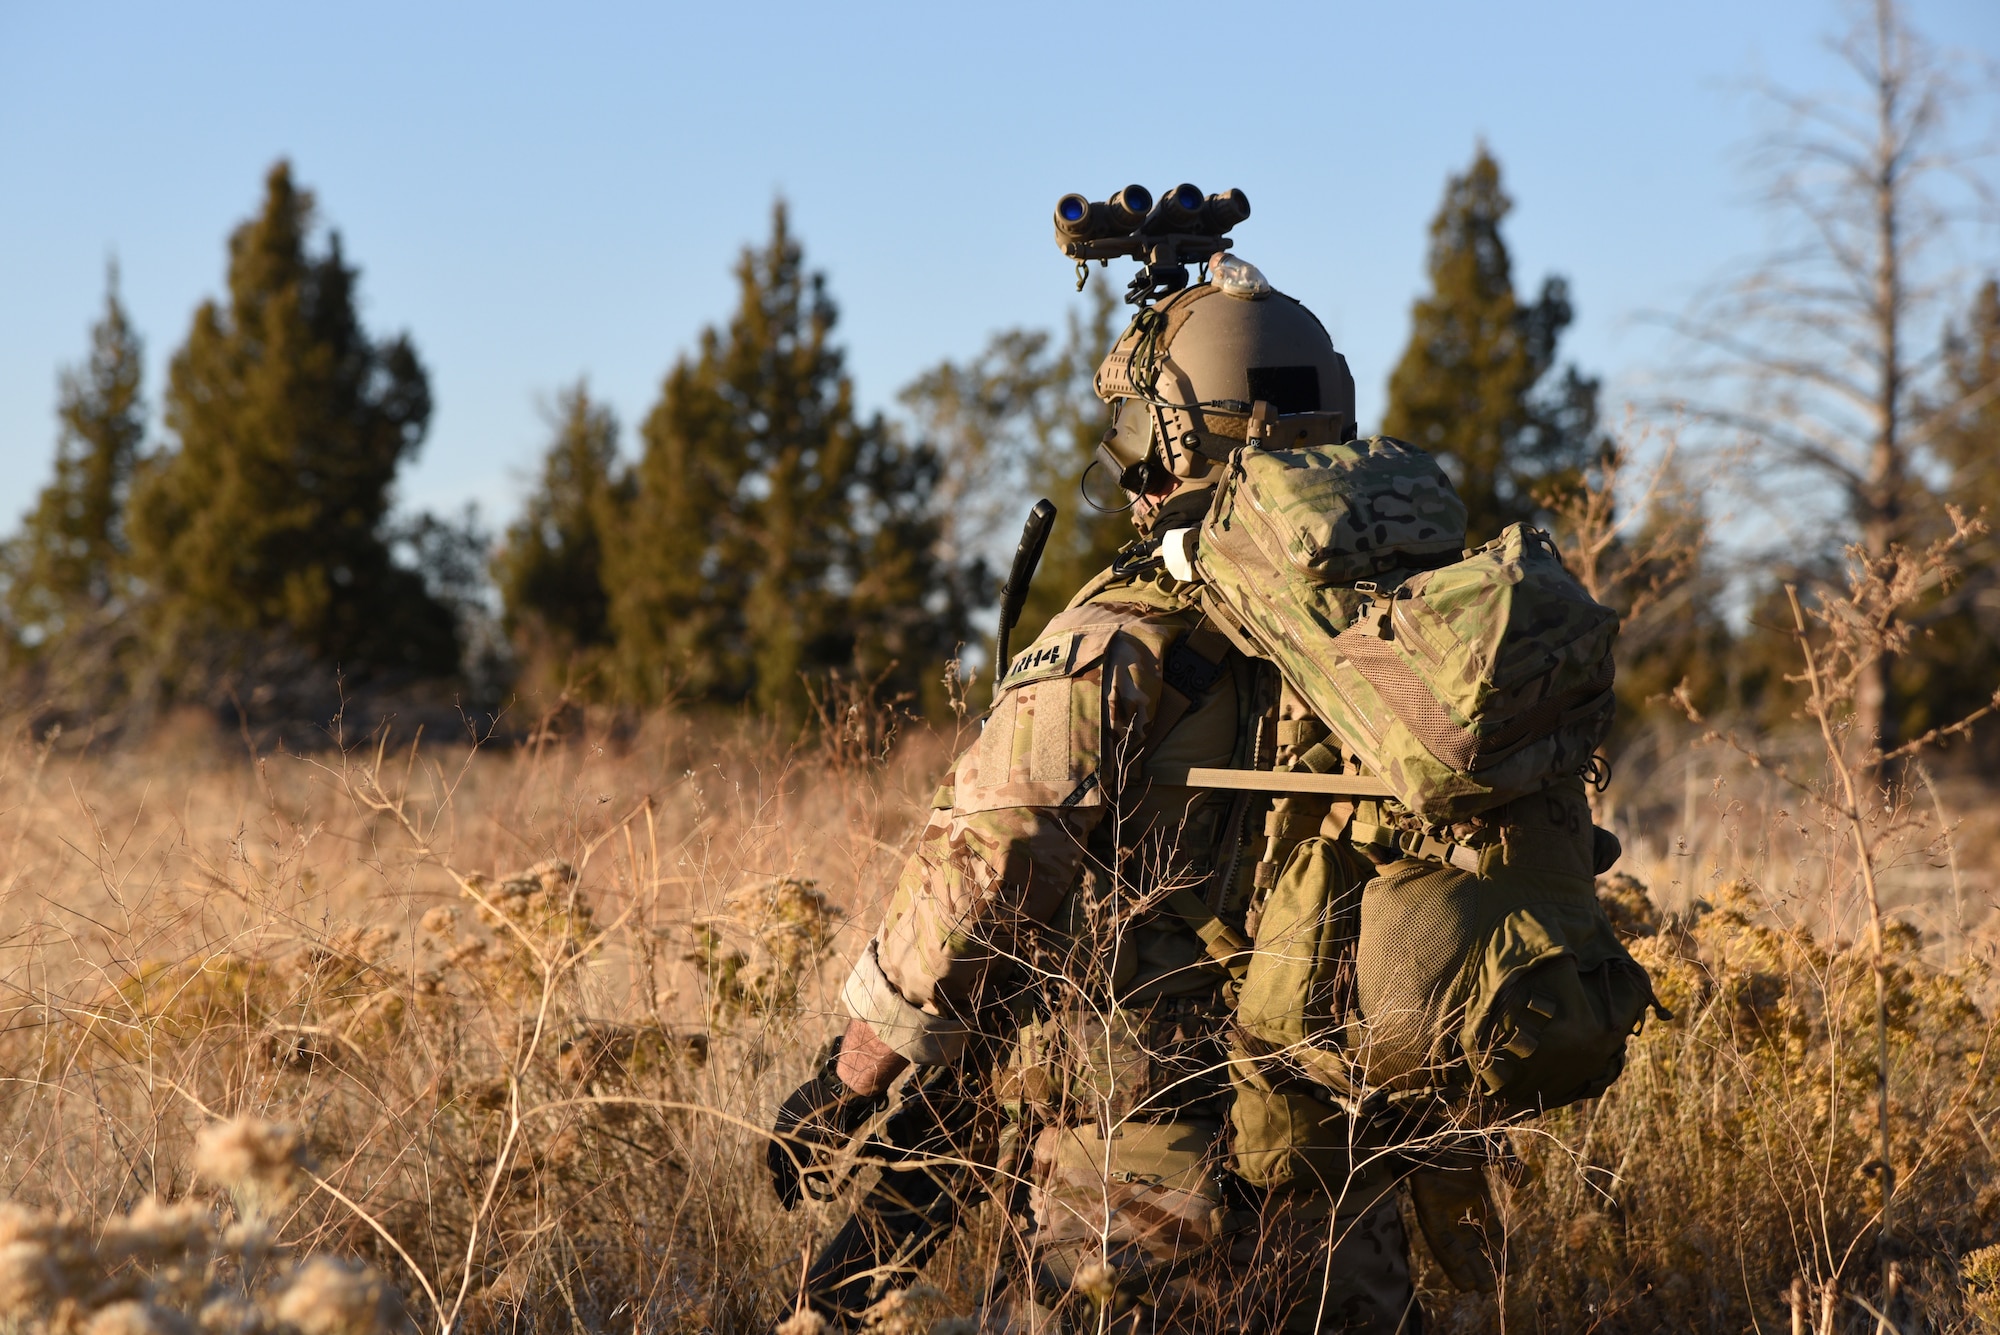 Overcoming Adversity: How an Italian Became a Special Tactics Operator